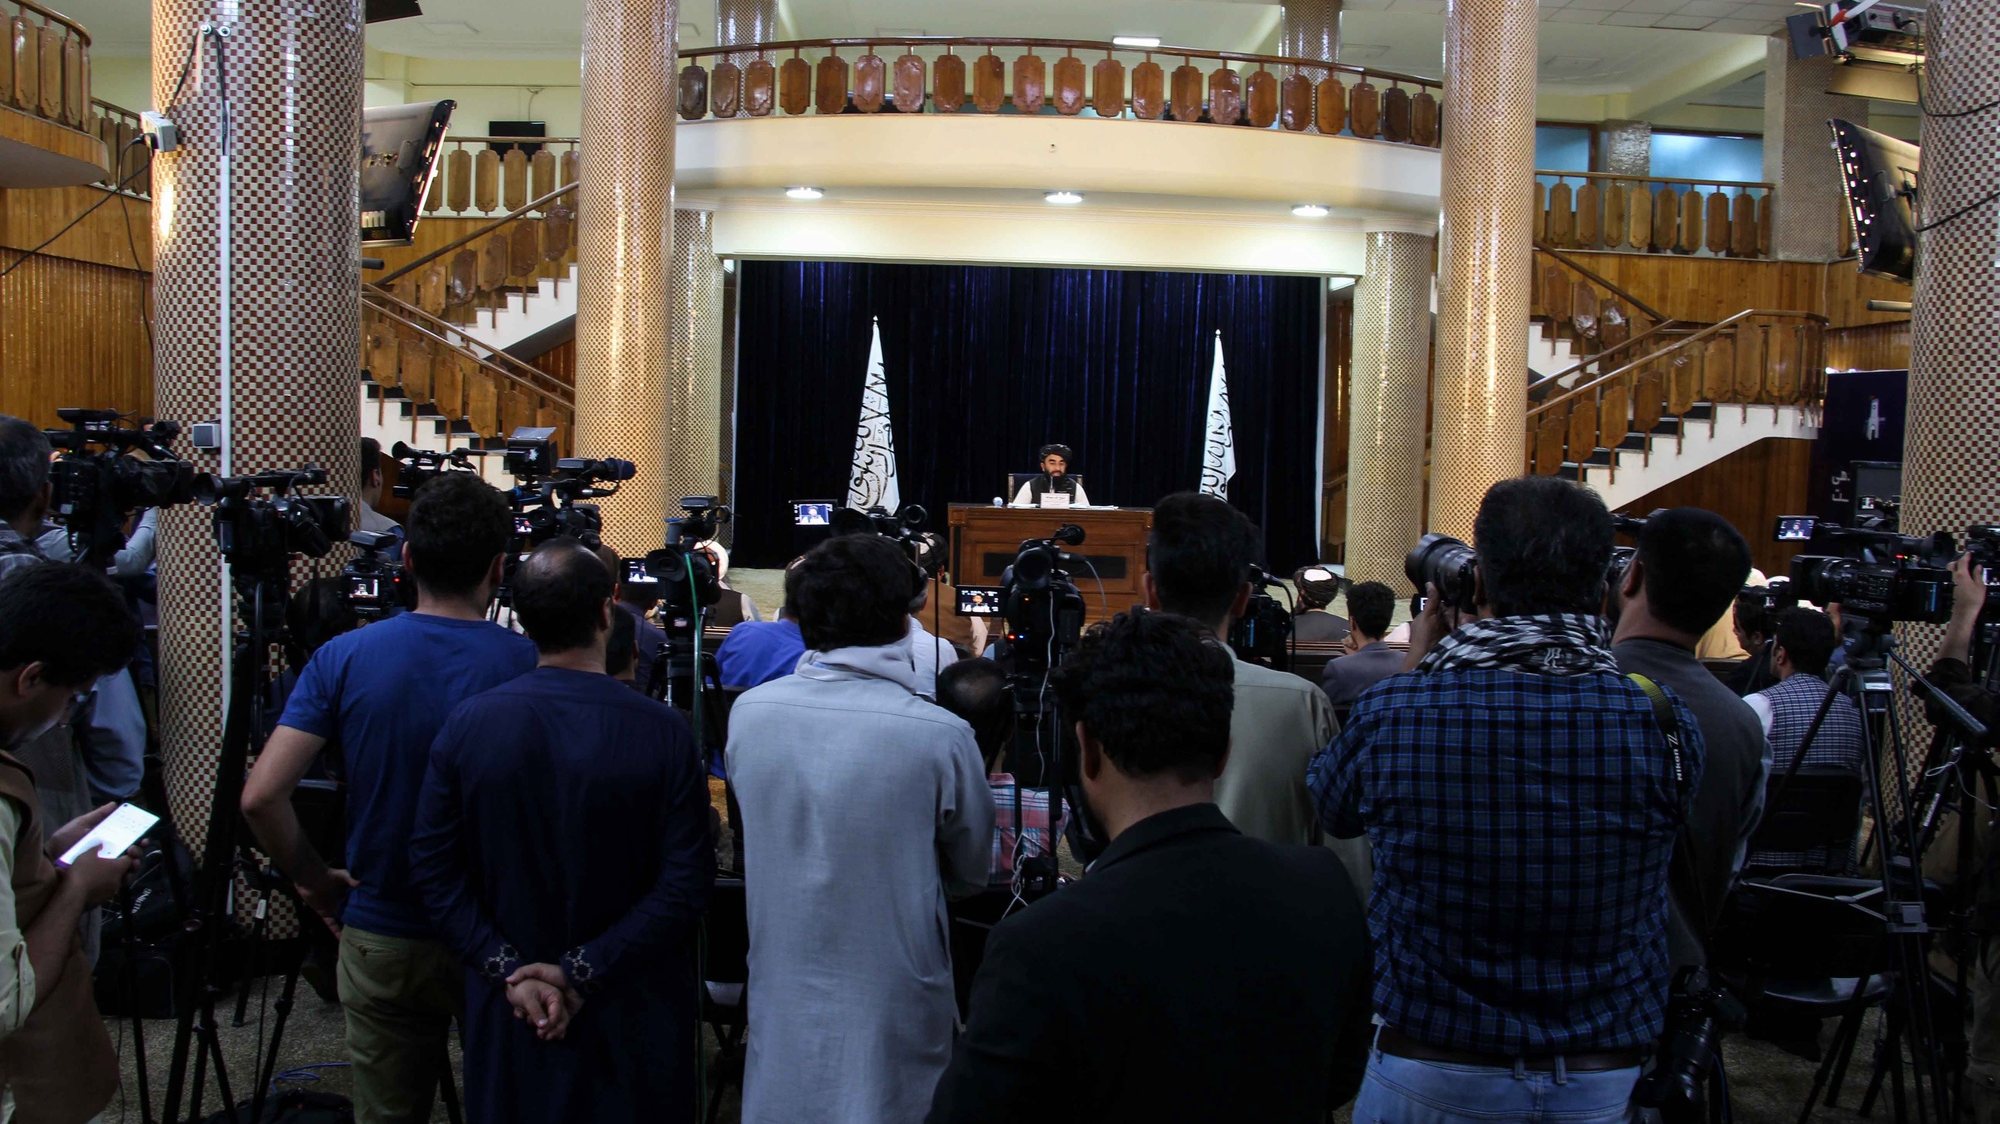 epa09453992 Zabhiullah Mujahid, the Taliban spokesperson, talks with journalists as he announces the interim government and declaring the country as an Islamic Emirate, during a press conference in Kabul, Afghanistan, 07 September 2021. Mujahid said the government will be led by Mullah Mohammad Hassan Akhund, with Sarajuddin Haqqani as the Interior Minister. Mullah Yaqoob as acting Defence Minister, Amir Khan Muttaqi as acting Foreign Minister, and Taliban co-founder Mullah Abdul Ghani Baradar and Mullah Abdul Salam Hanafi as two deputies.  EPA/STRINGER